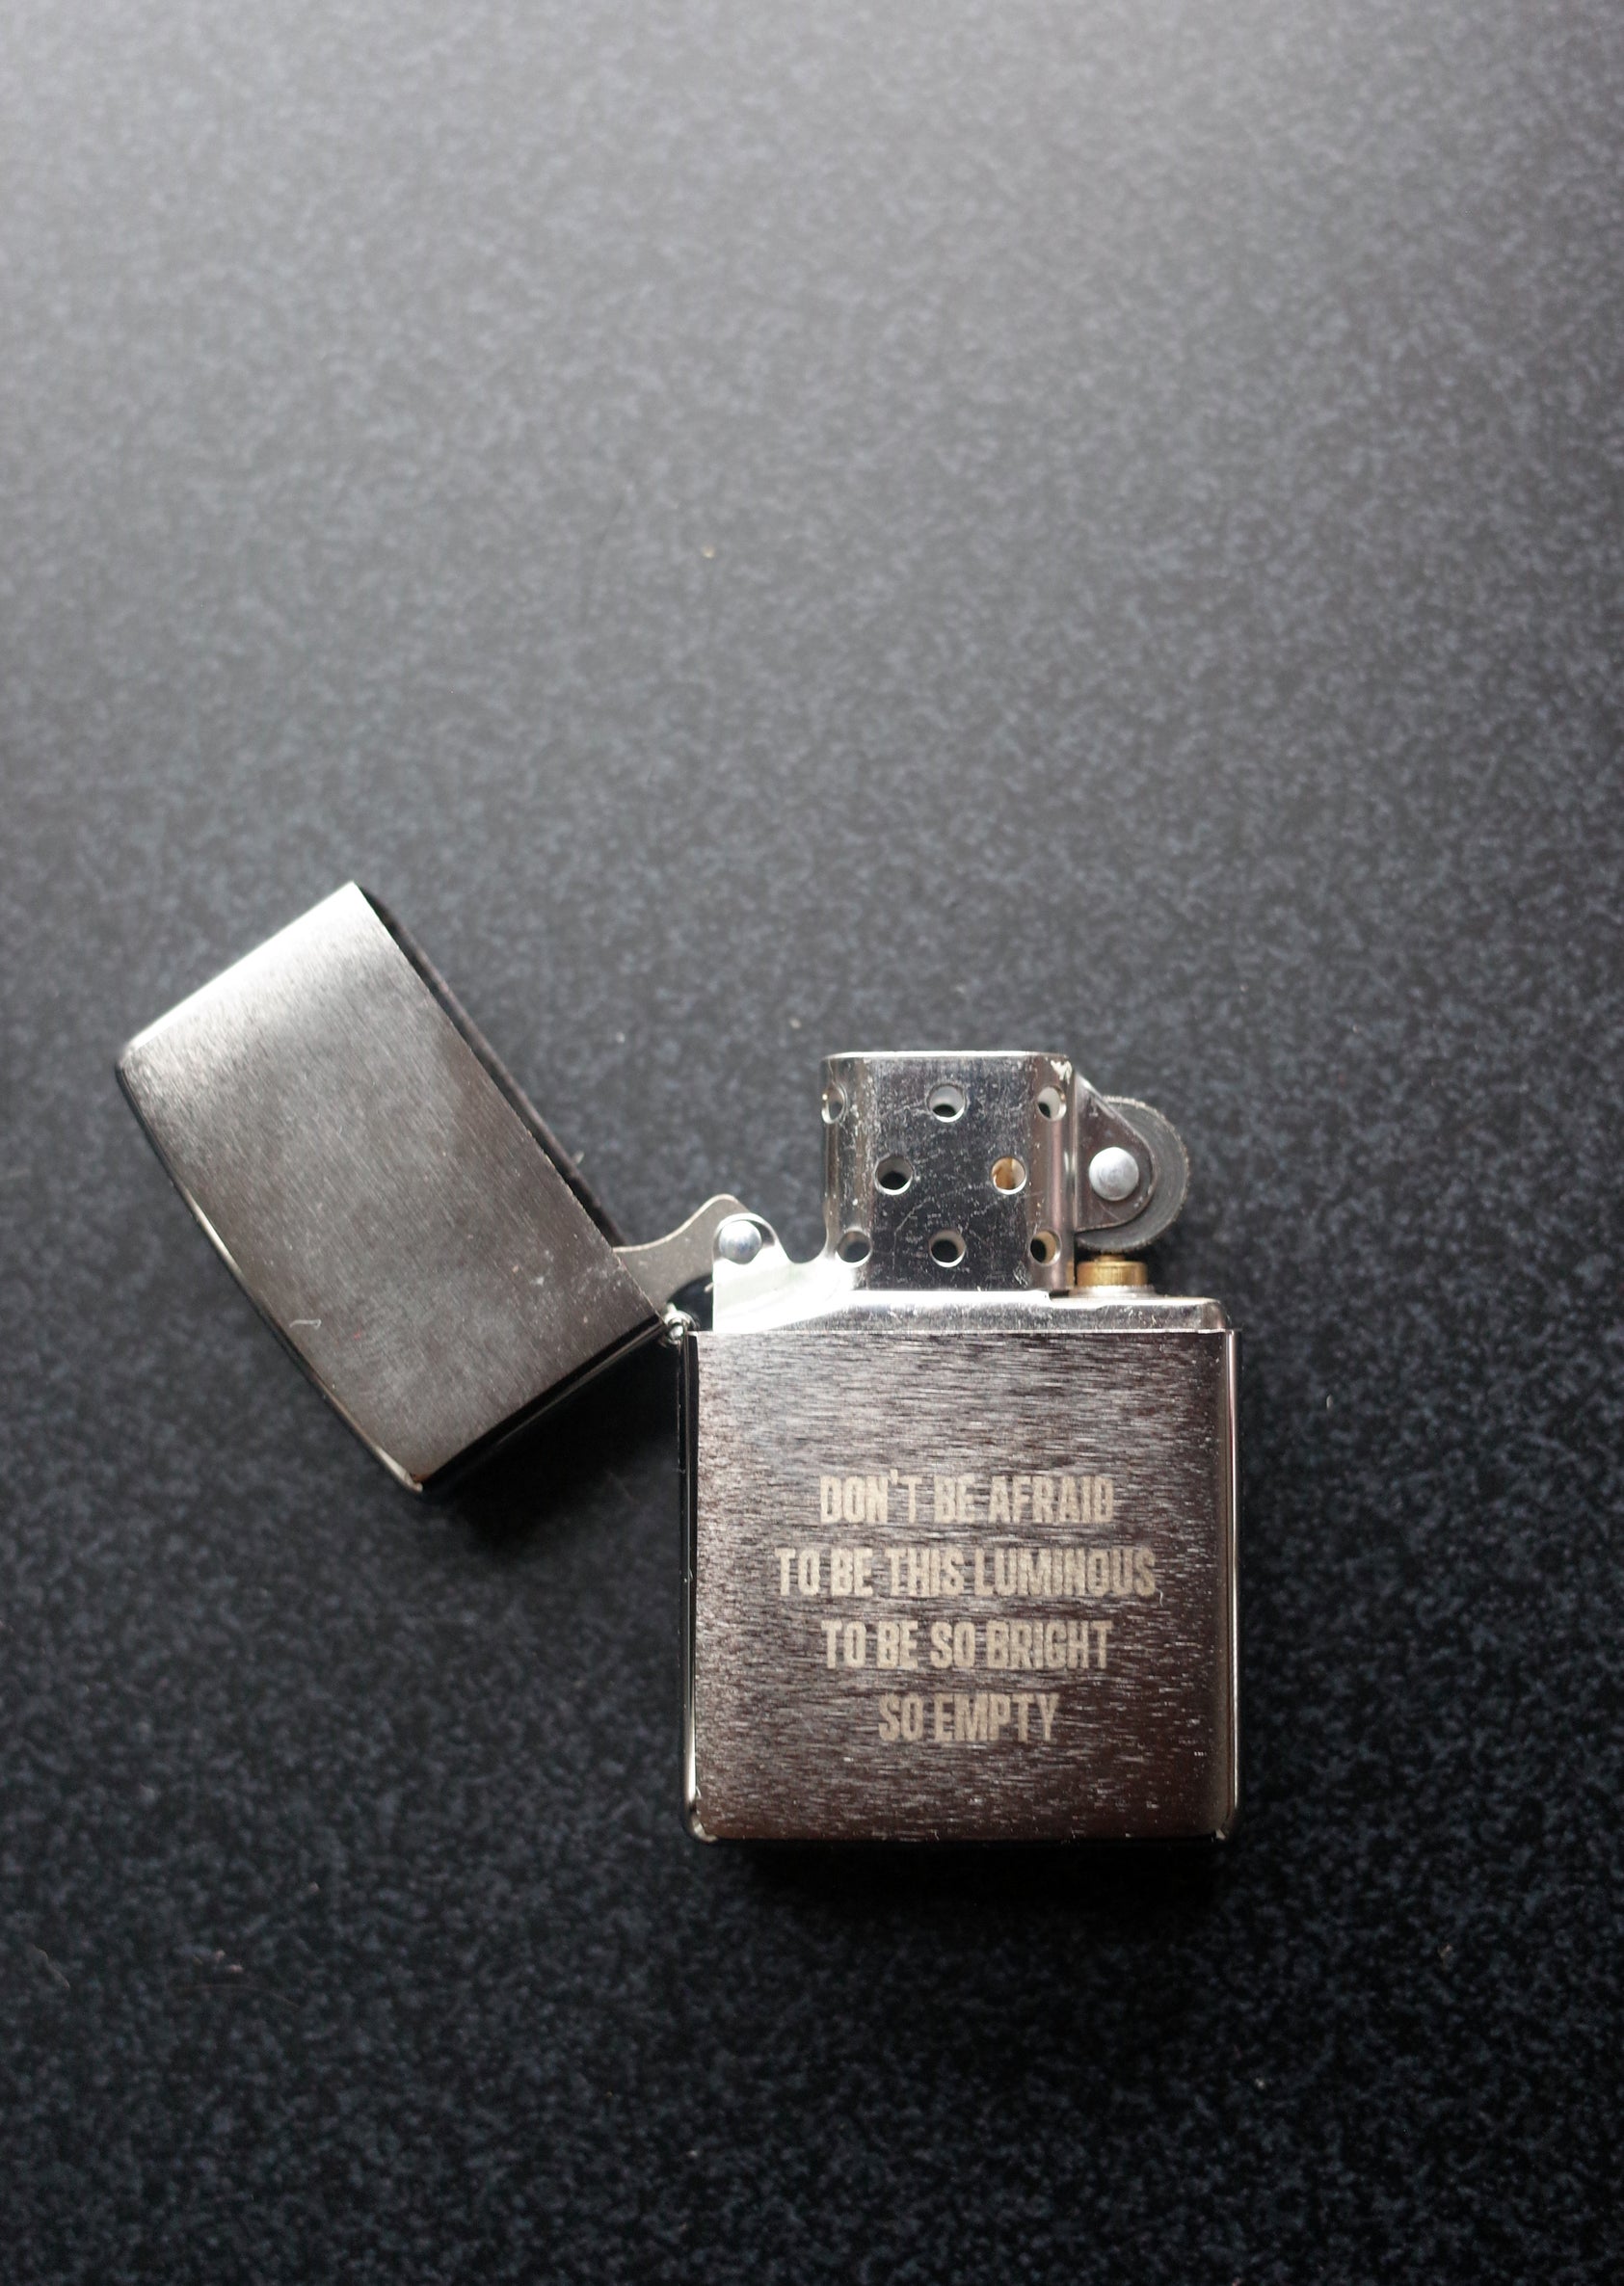 Open Zippo style lighter with the engraving "DON'T BE AFRAID TO BE THIS LUMINOUS TO BE SO BRIGHT SO EMPTY"